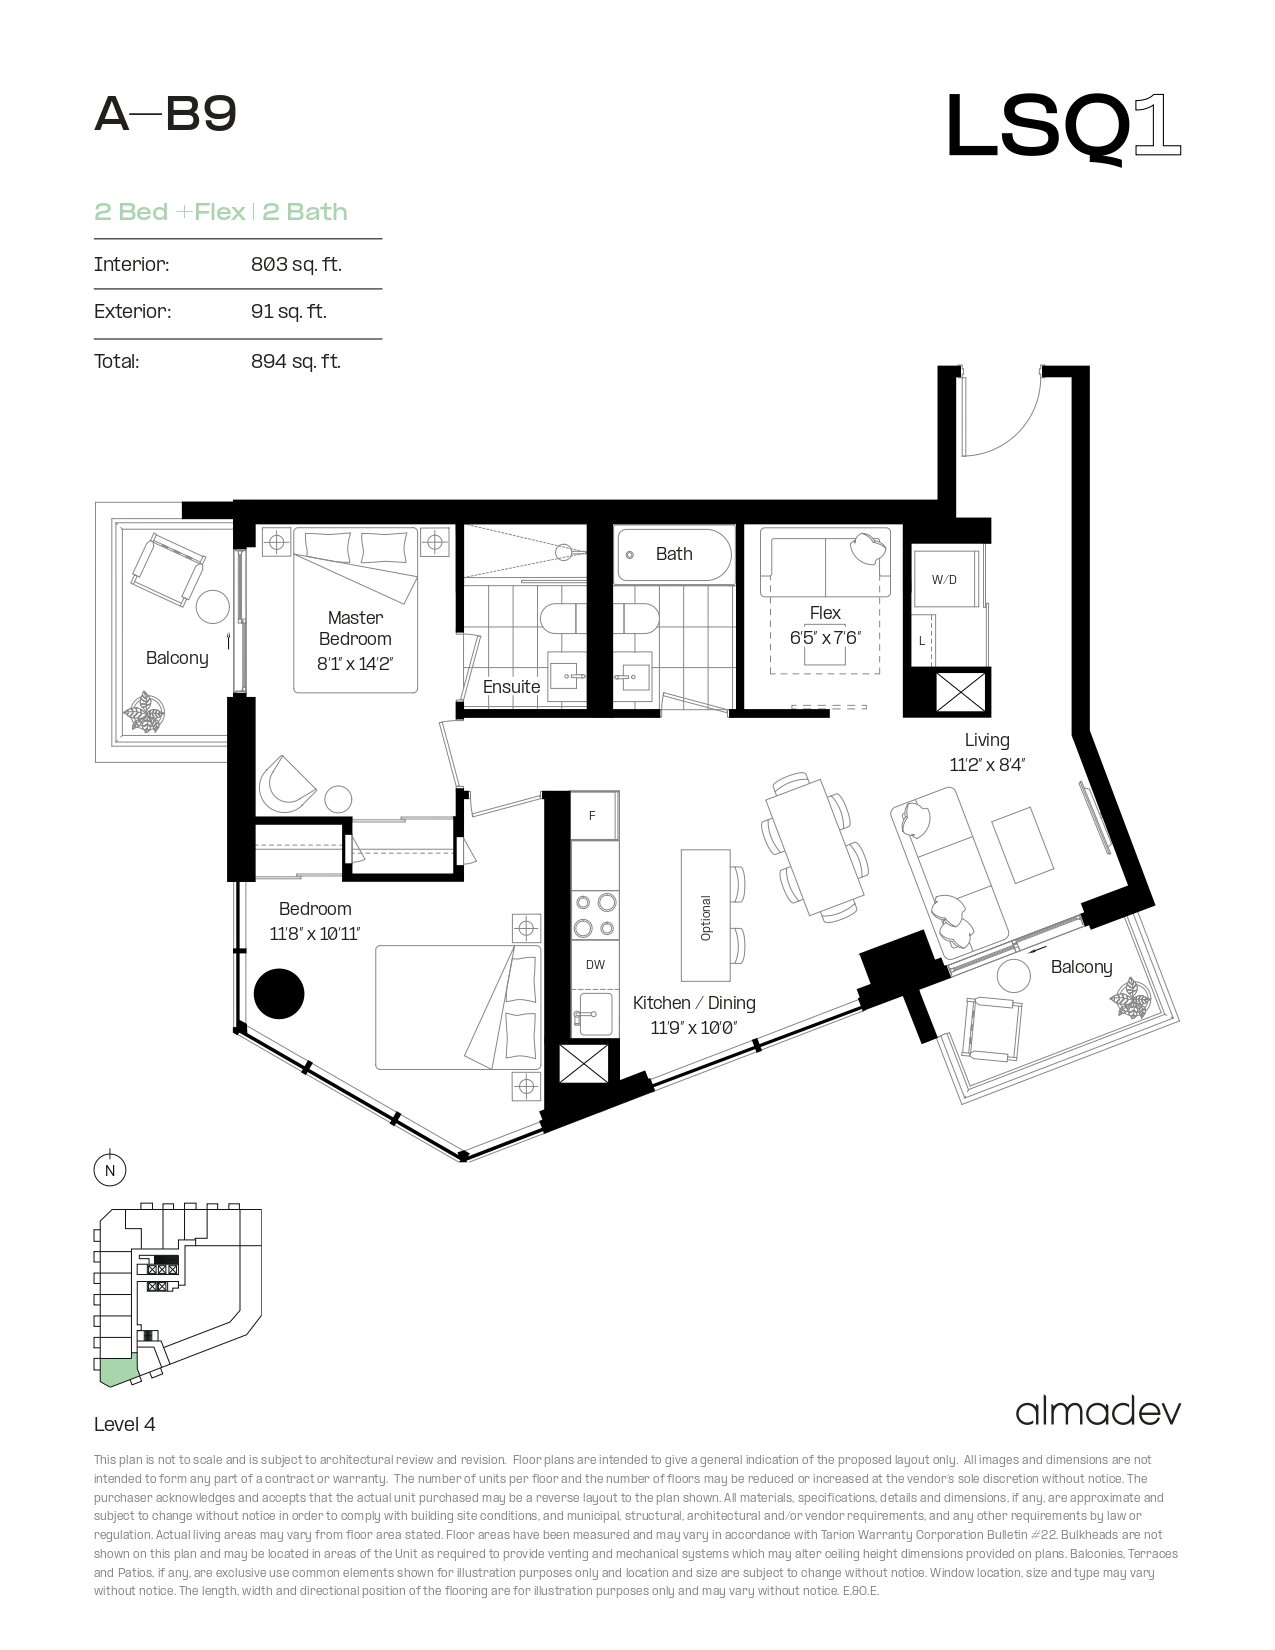 A-B9 Floor Plan of LSQ Condos with undefined beds